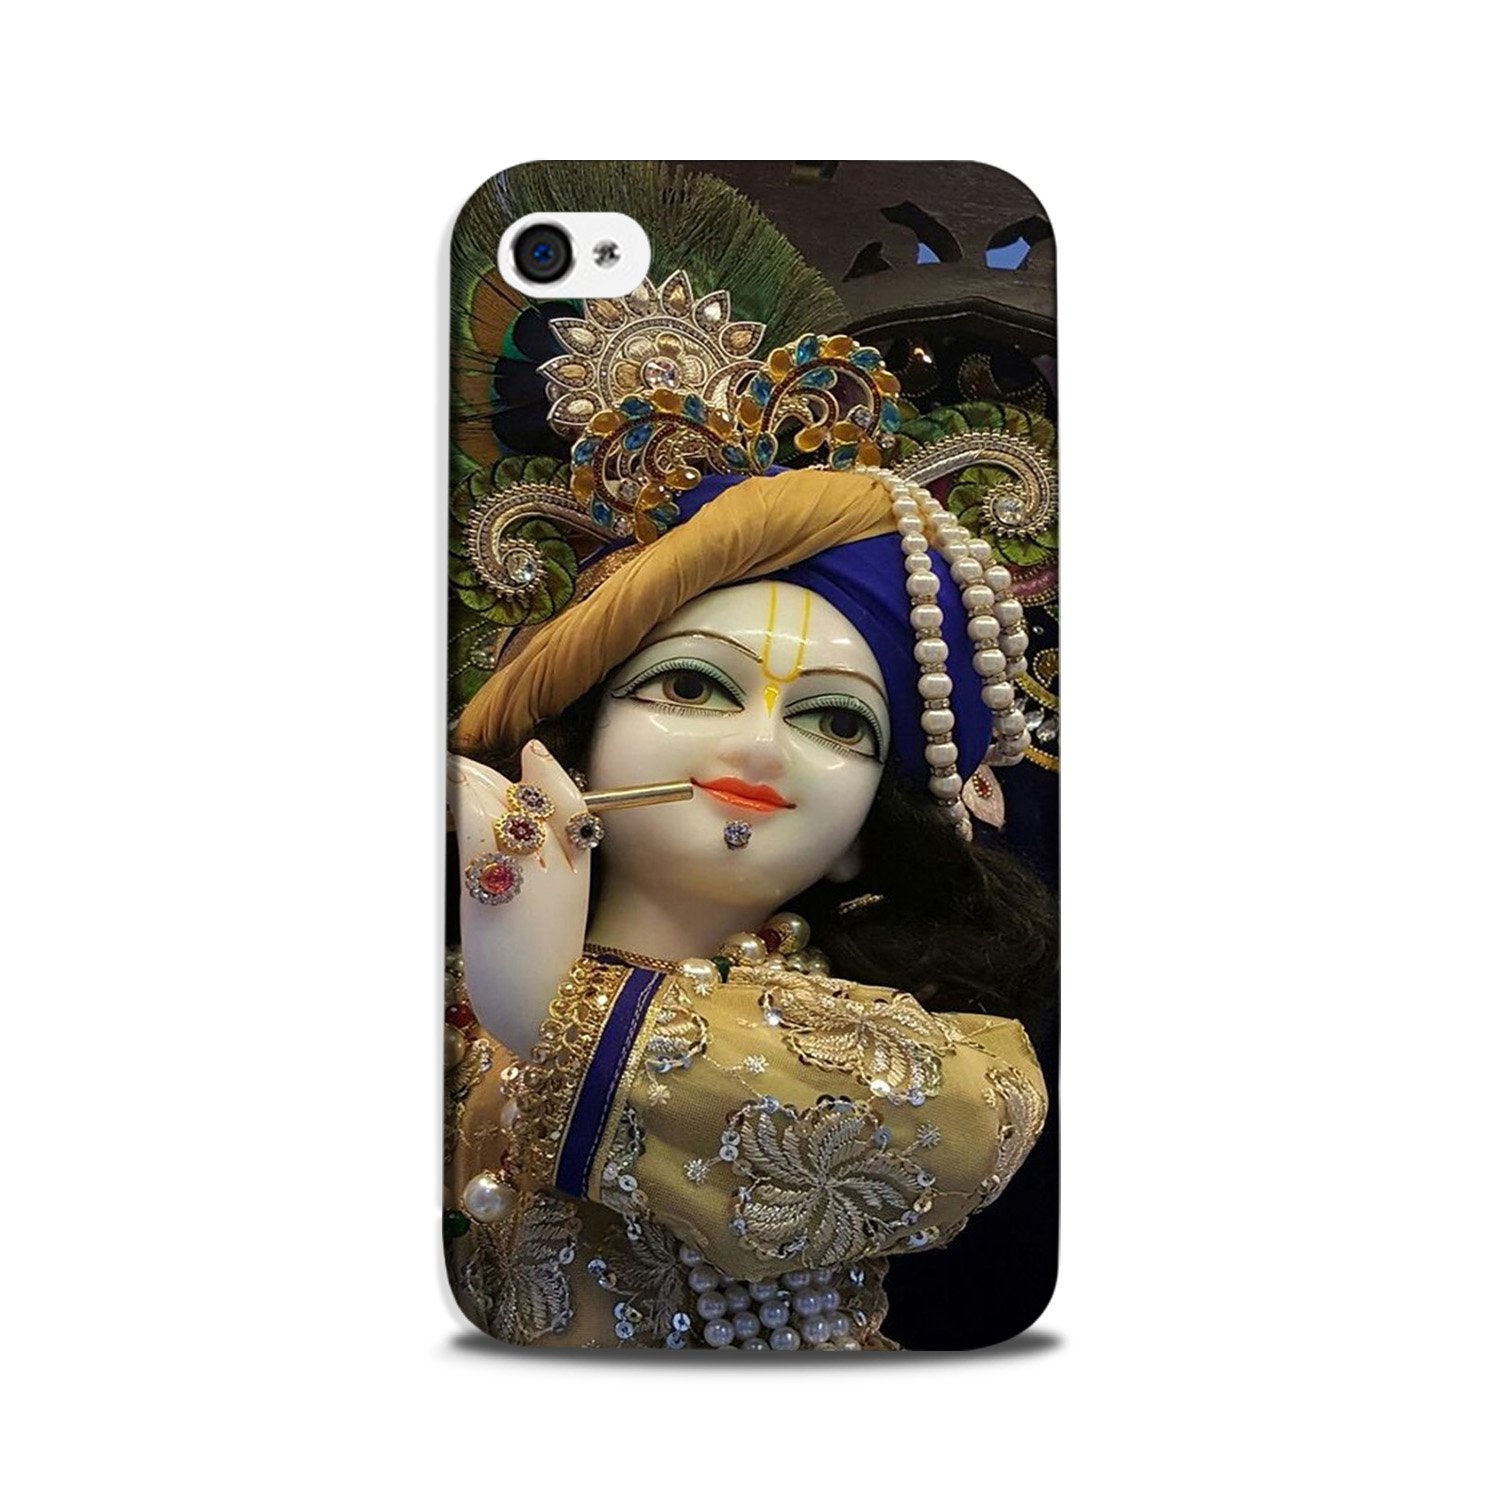 Lord Krishna3 Case for iPhone 5/ 5s